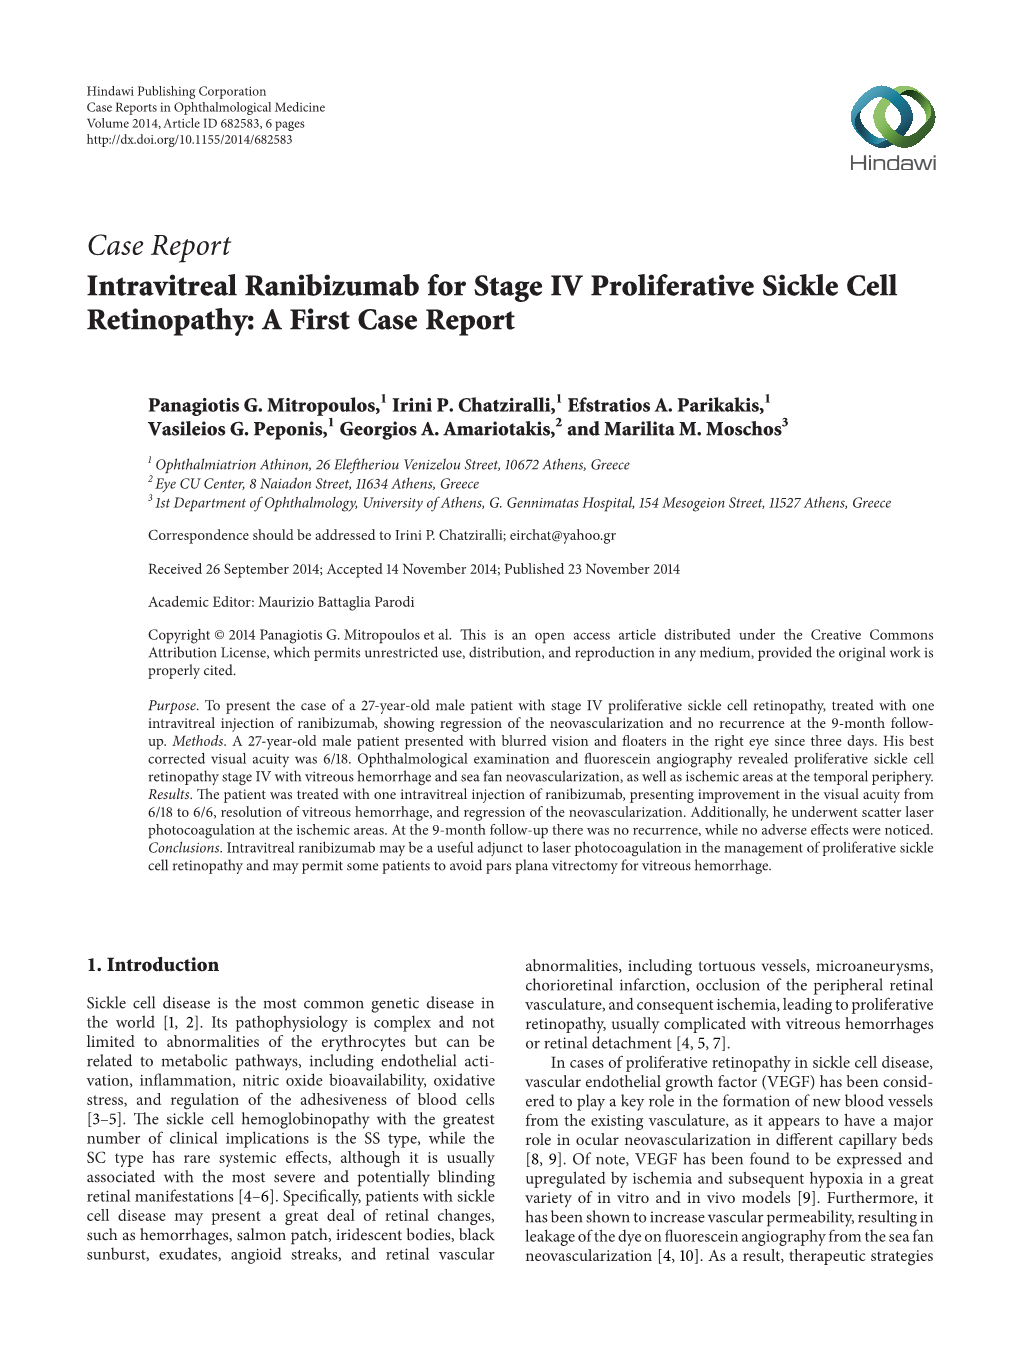 Intravitreal Ranibizumab for Stage IV Proliferative Sickle Cell Retinopathy: a First Case Report